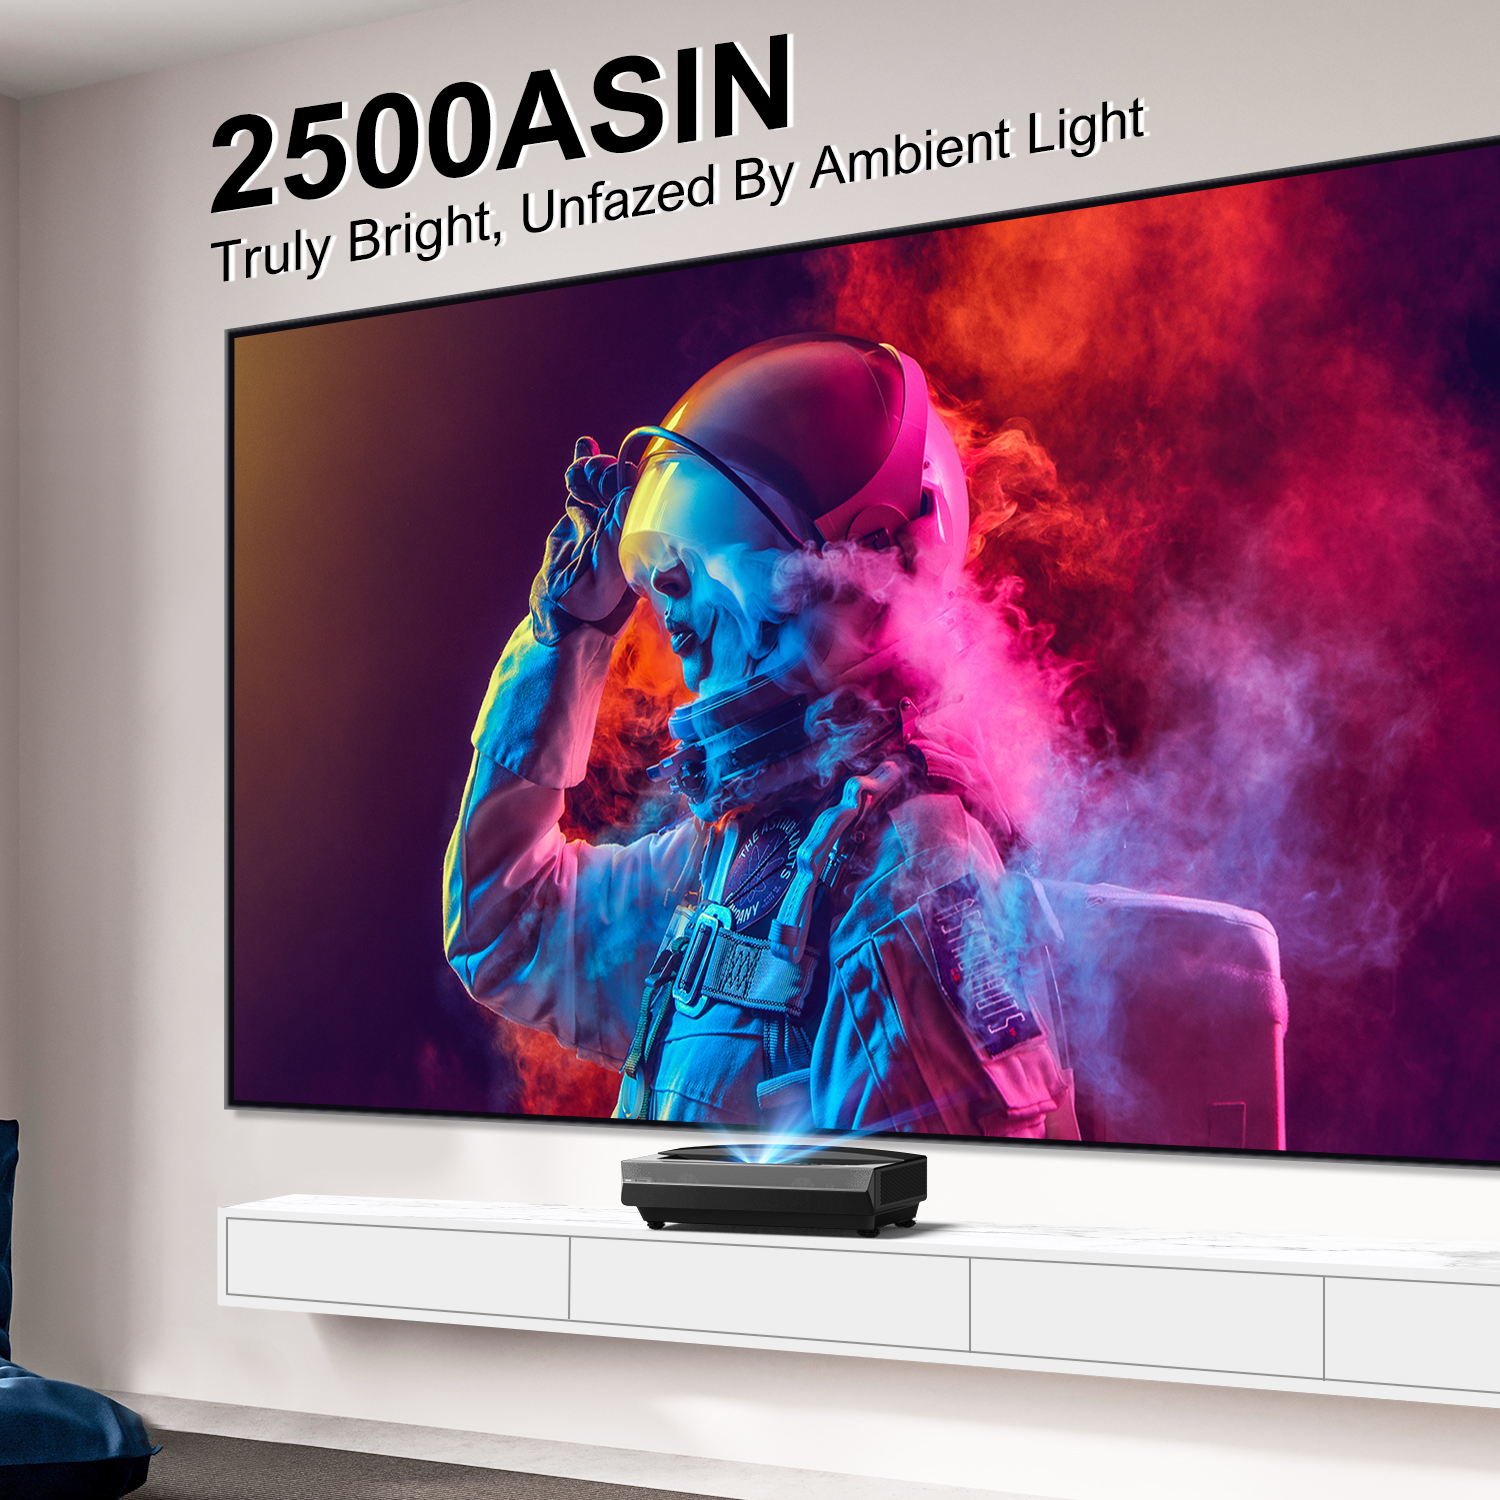 Bomaker RGB Triple Color 4K Ultra Short Throw Laser Projector with 2500 ANSI Lumens, HDR 10, MEMC, Dolby & DTS for a Laser TV Home Theater Experience - image 5 of 9